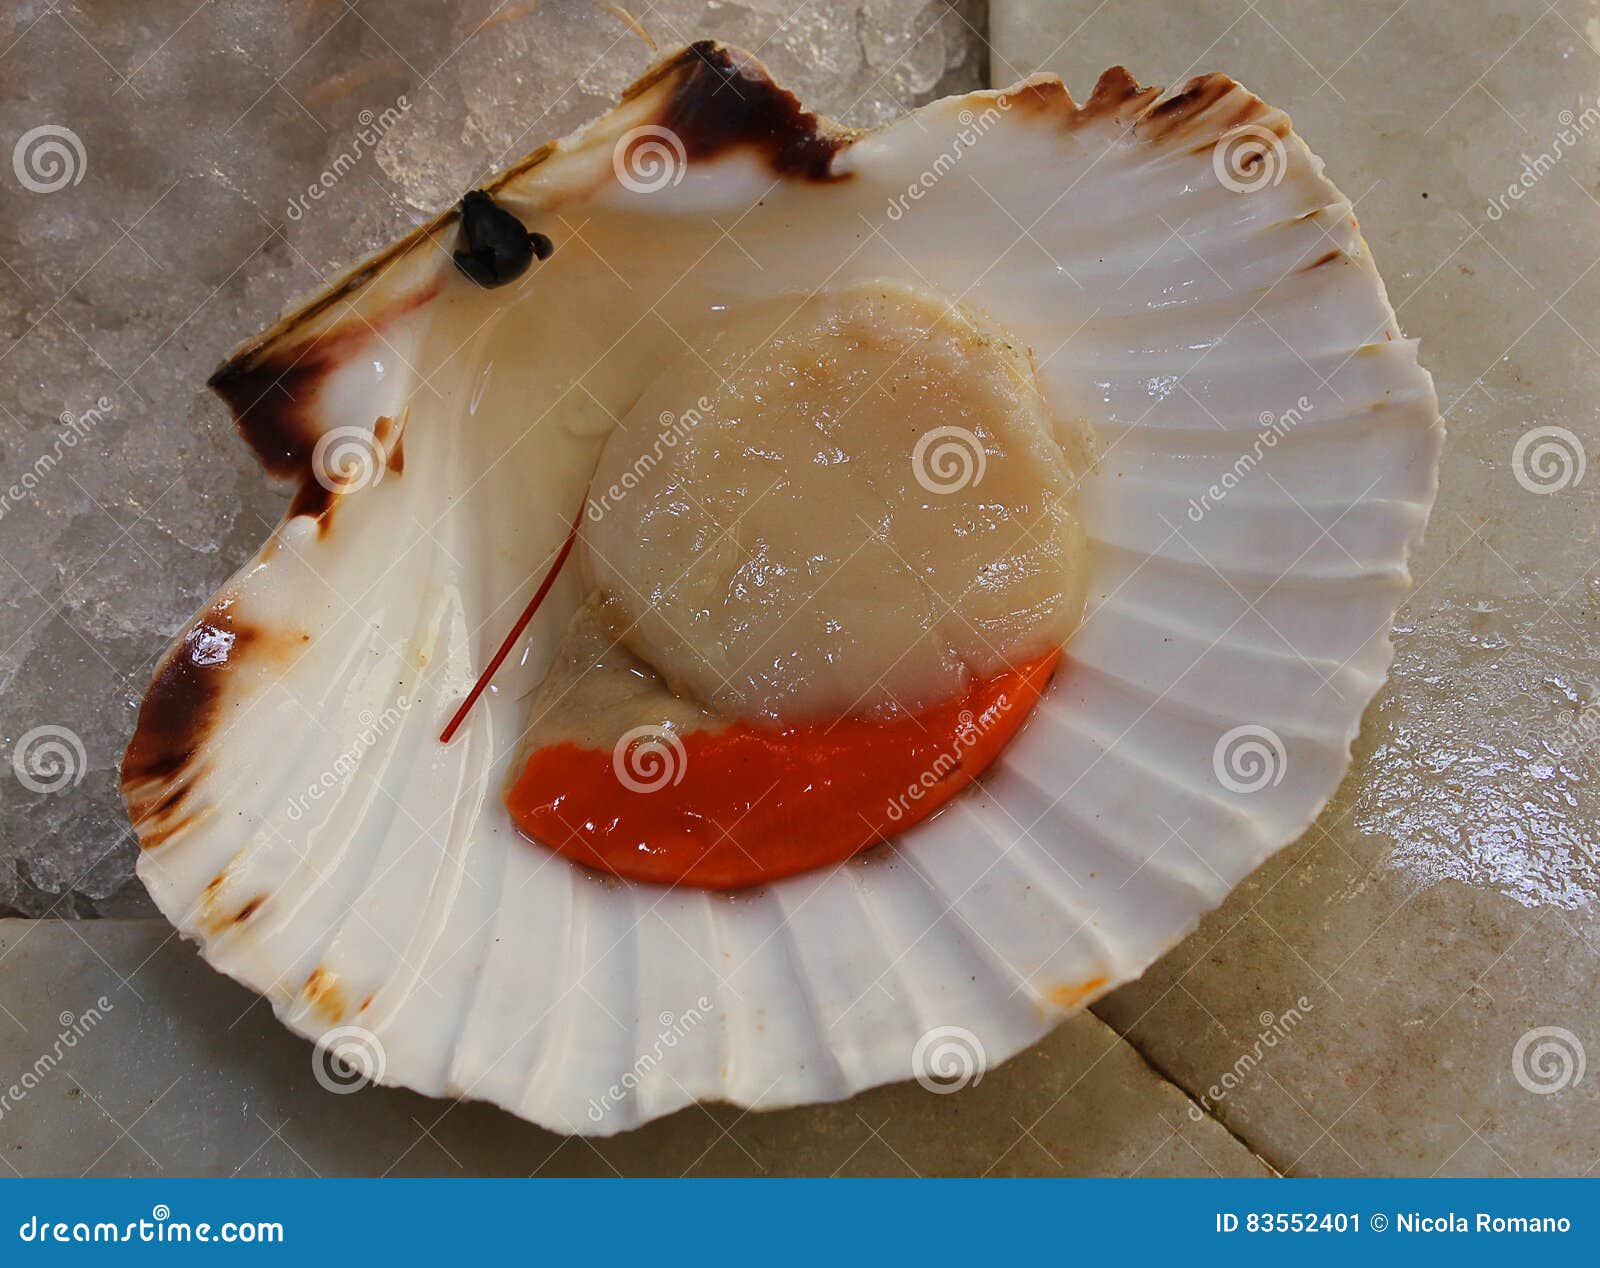 Scallop on ice stock image. Image of marine, ocean, seafood - 83552401